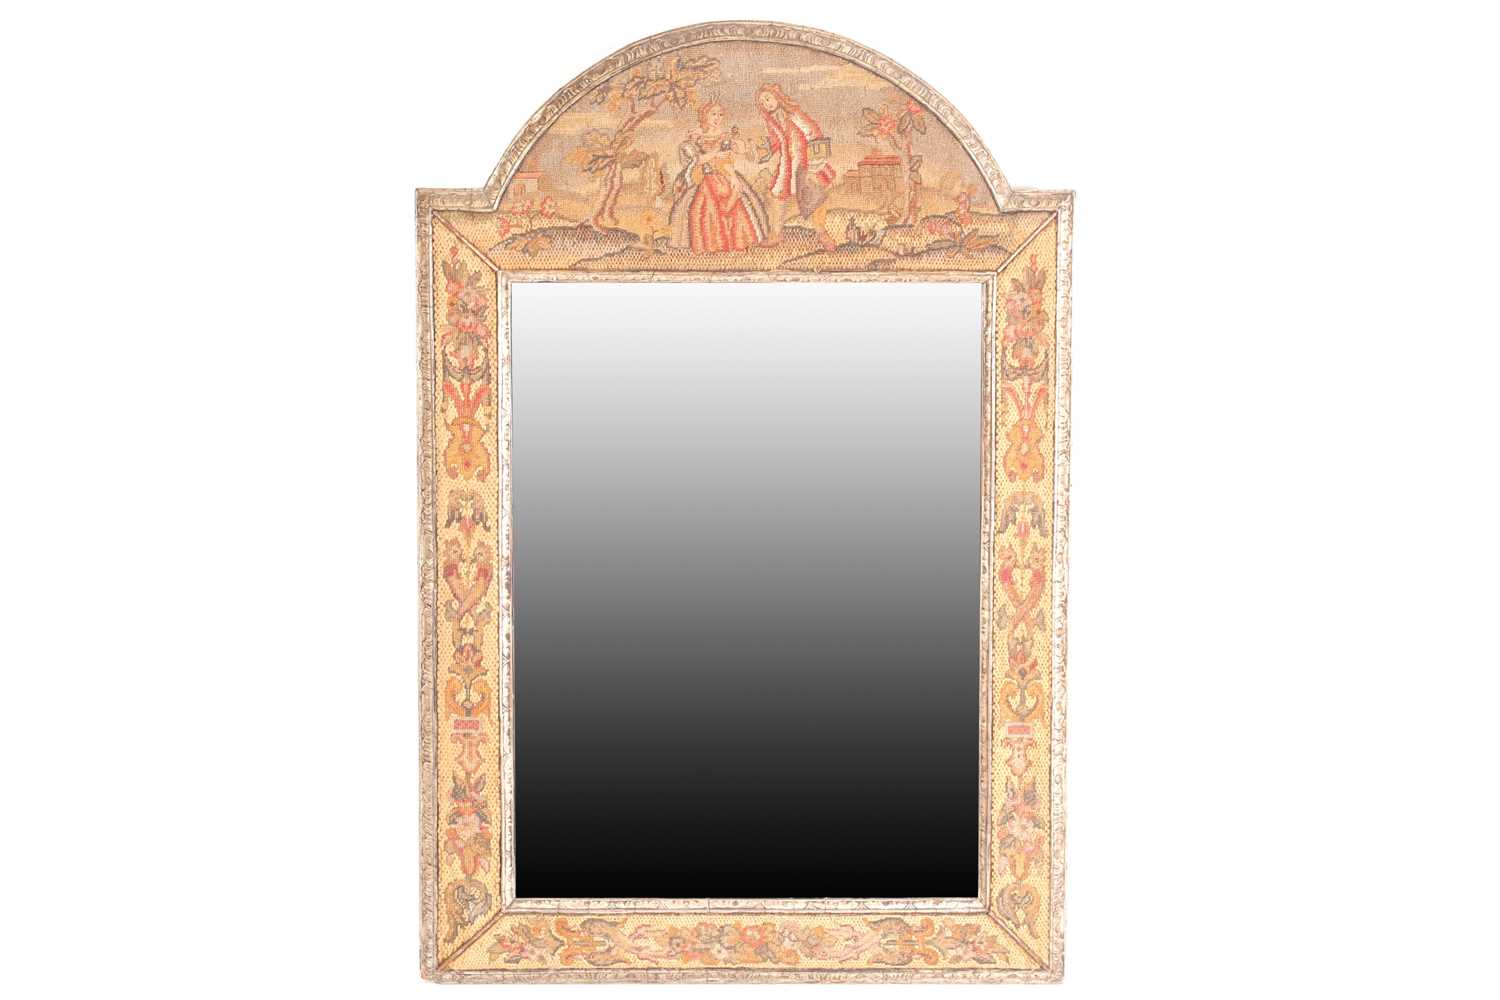 A Charles II style needlework wall mirror, the carved and silvered frame with embroidered scenes